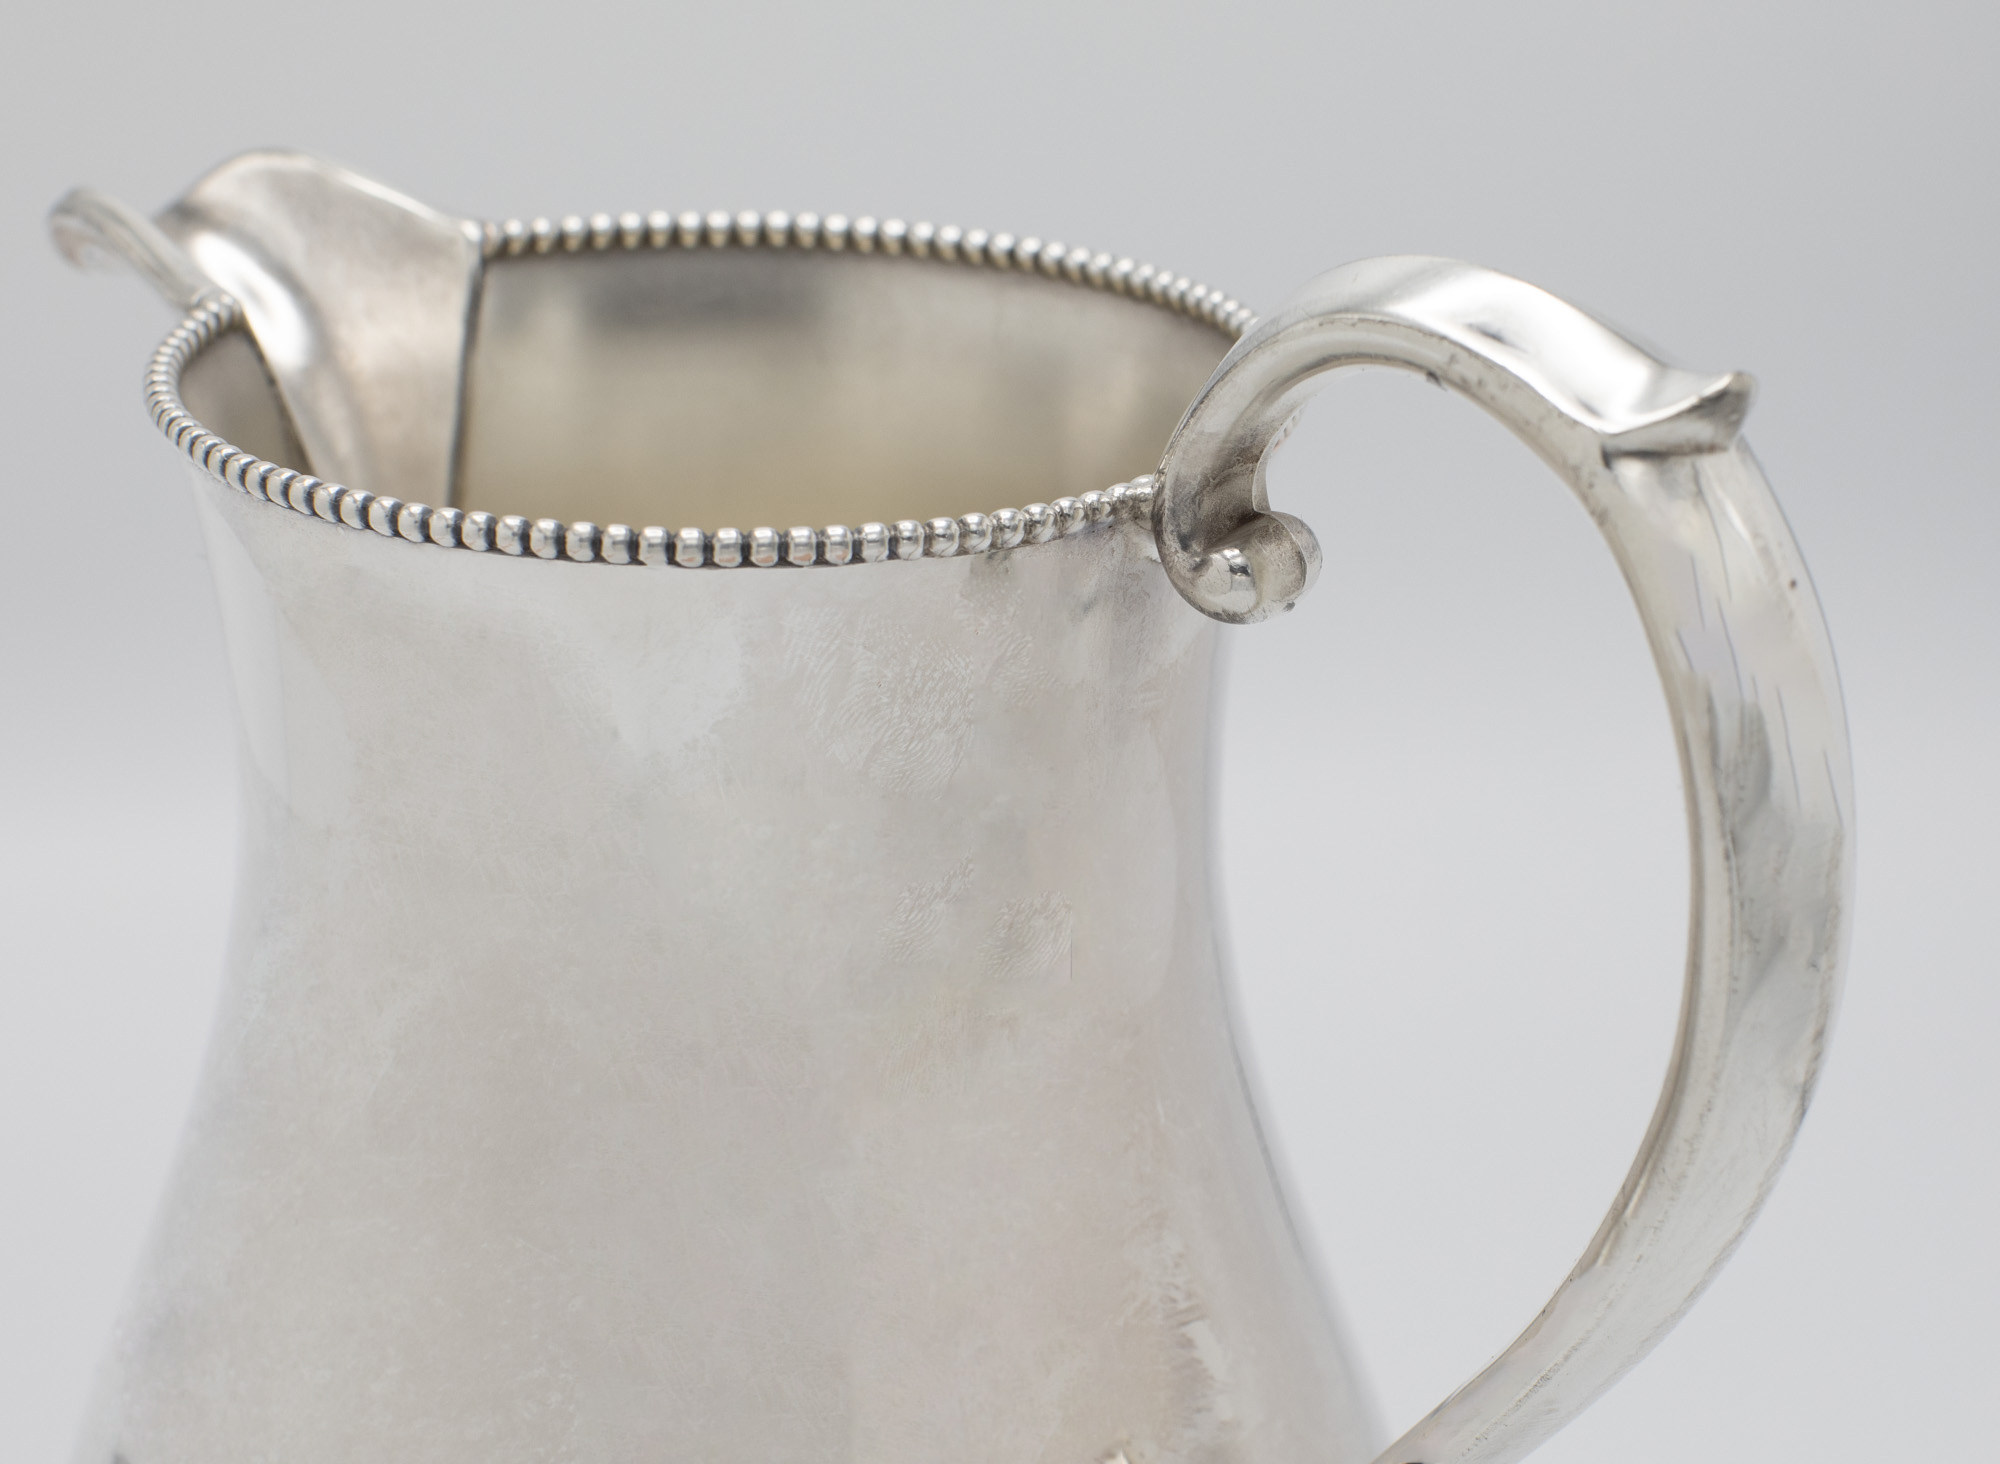 Vintage Italian Pitcher With Silver Plated Pour Spout and Handle on Molded  Glass Base